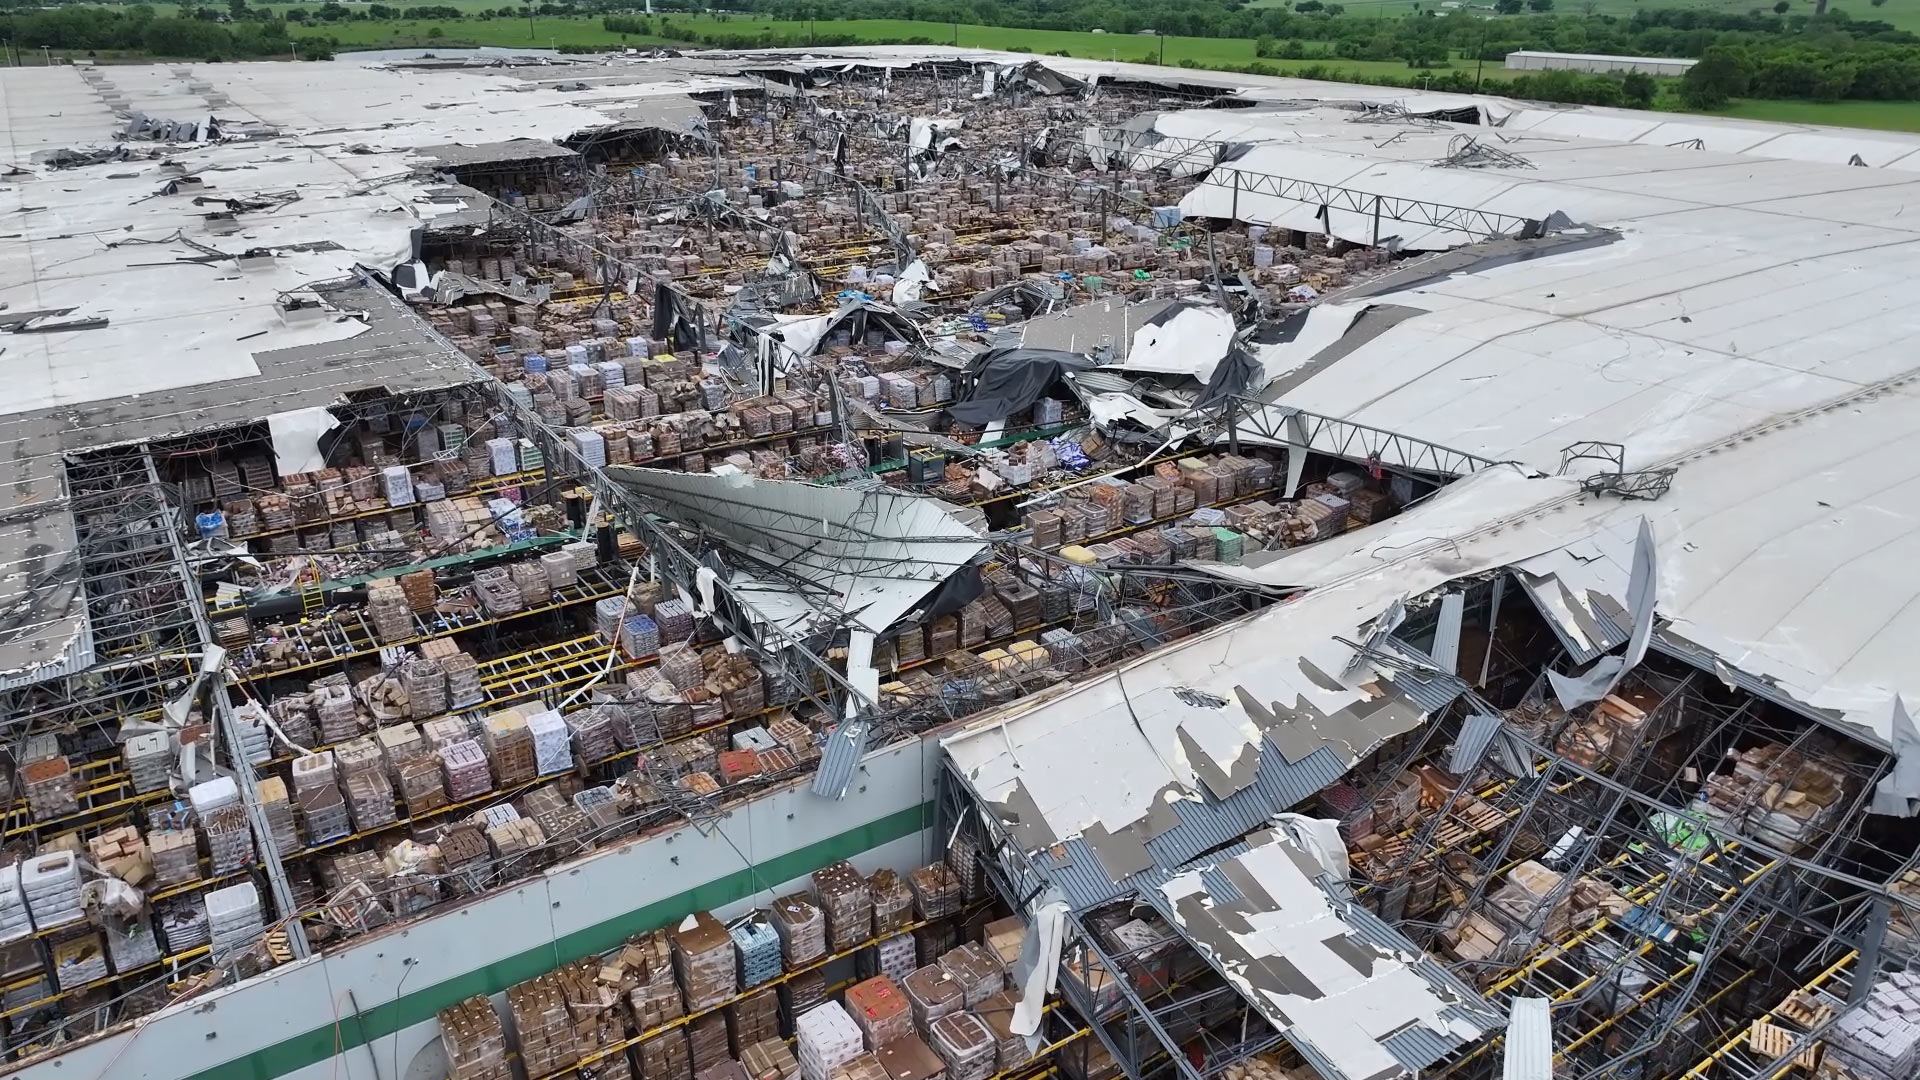 Top view of a multi-story Dollar Tree distribution warehouse heavily damaged after a tornado.